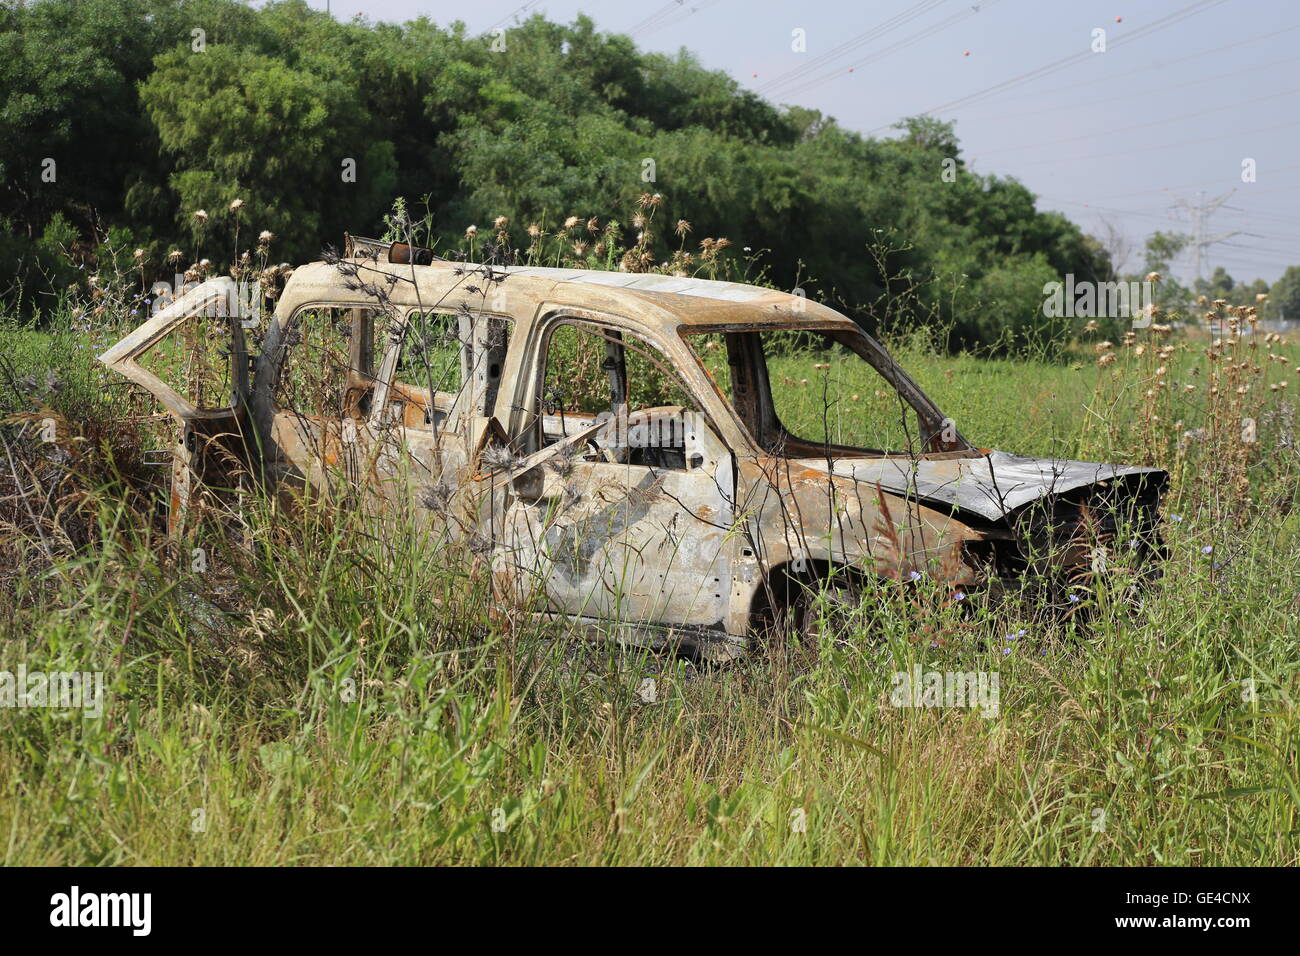 Burned Car. Burned car in a field.  Close up of burned down car chassis in a field of thorns. Stock Photo